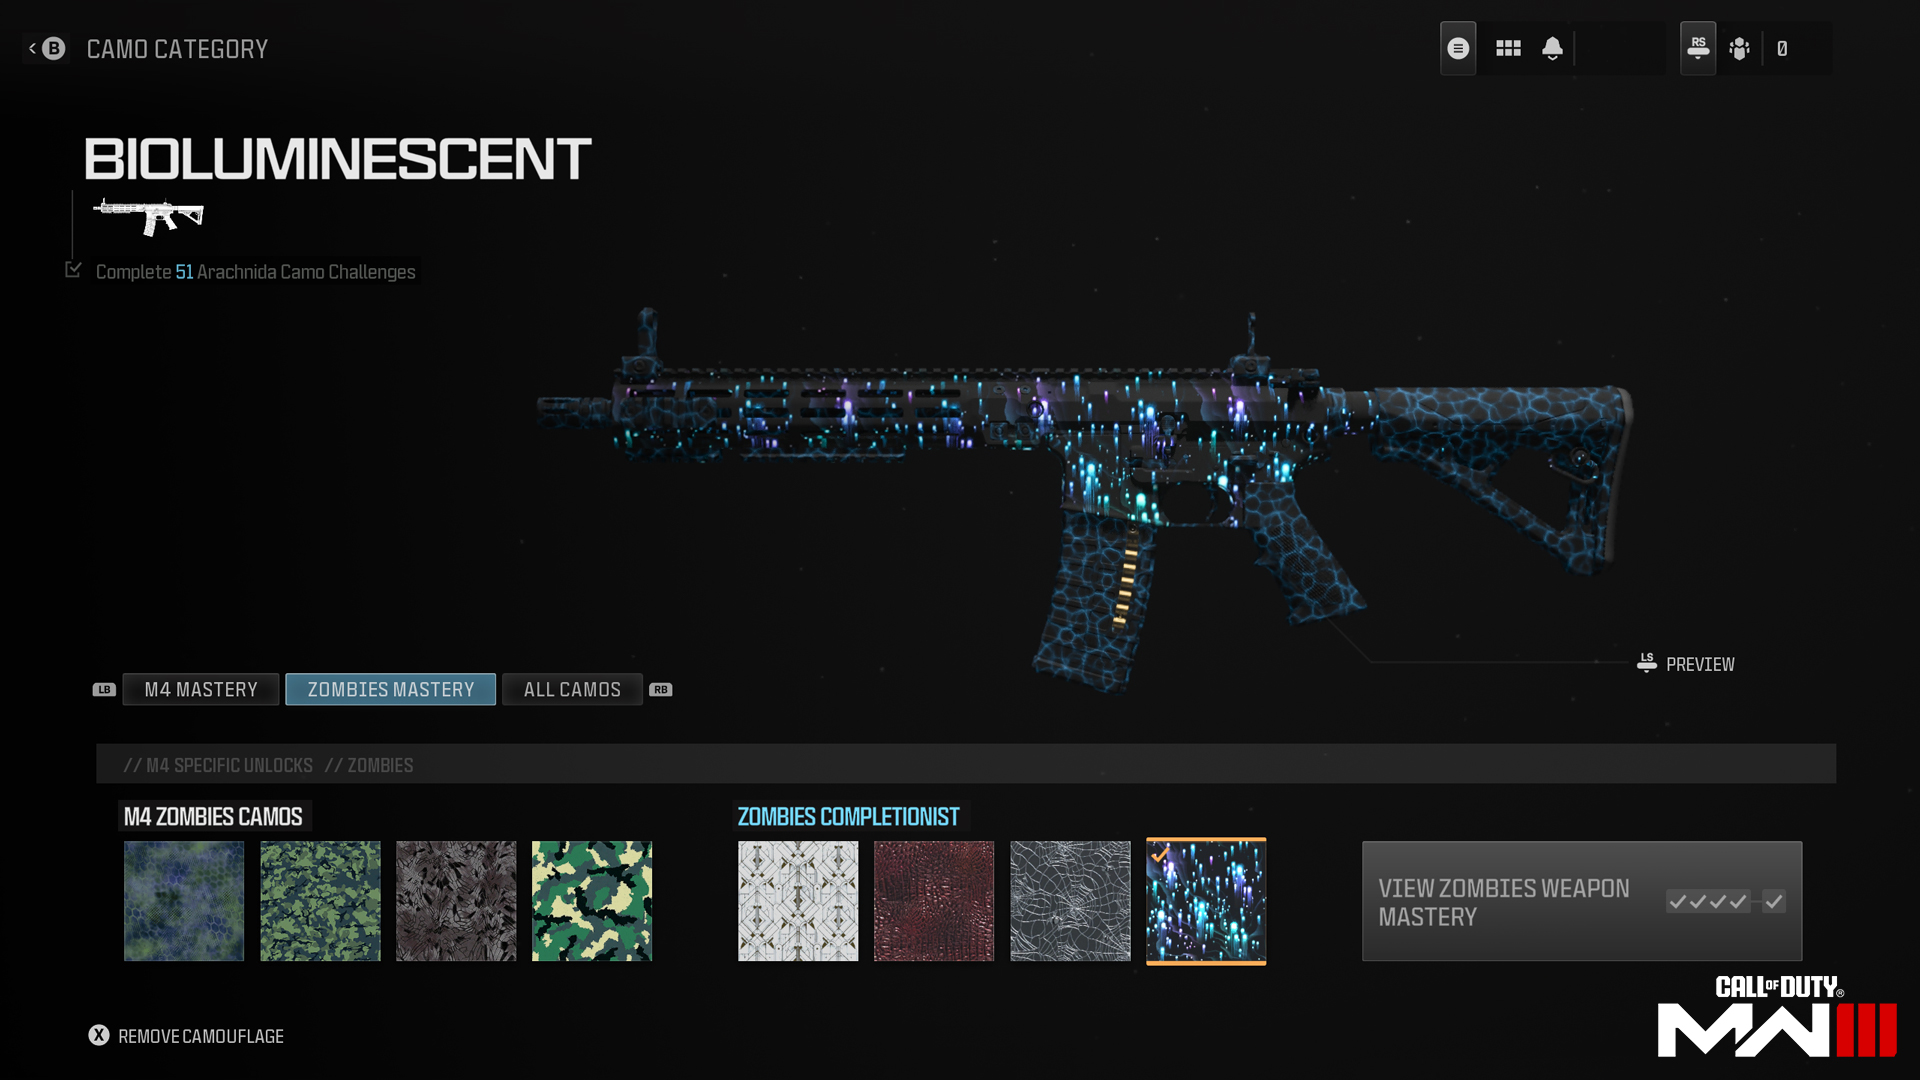 An image of the Bioluminescent Zombies camo in MW3.